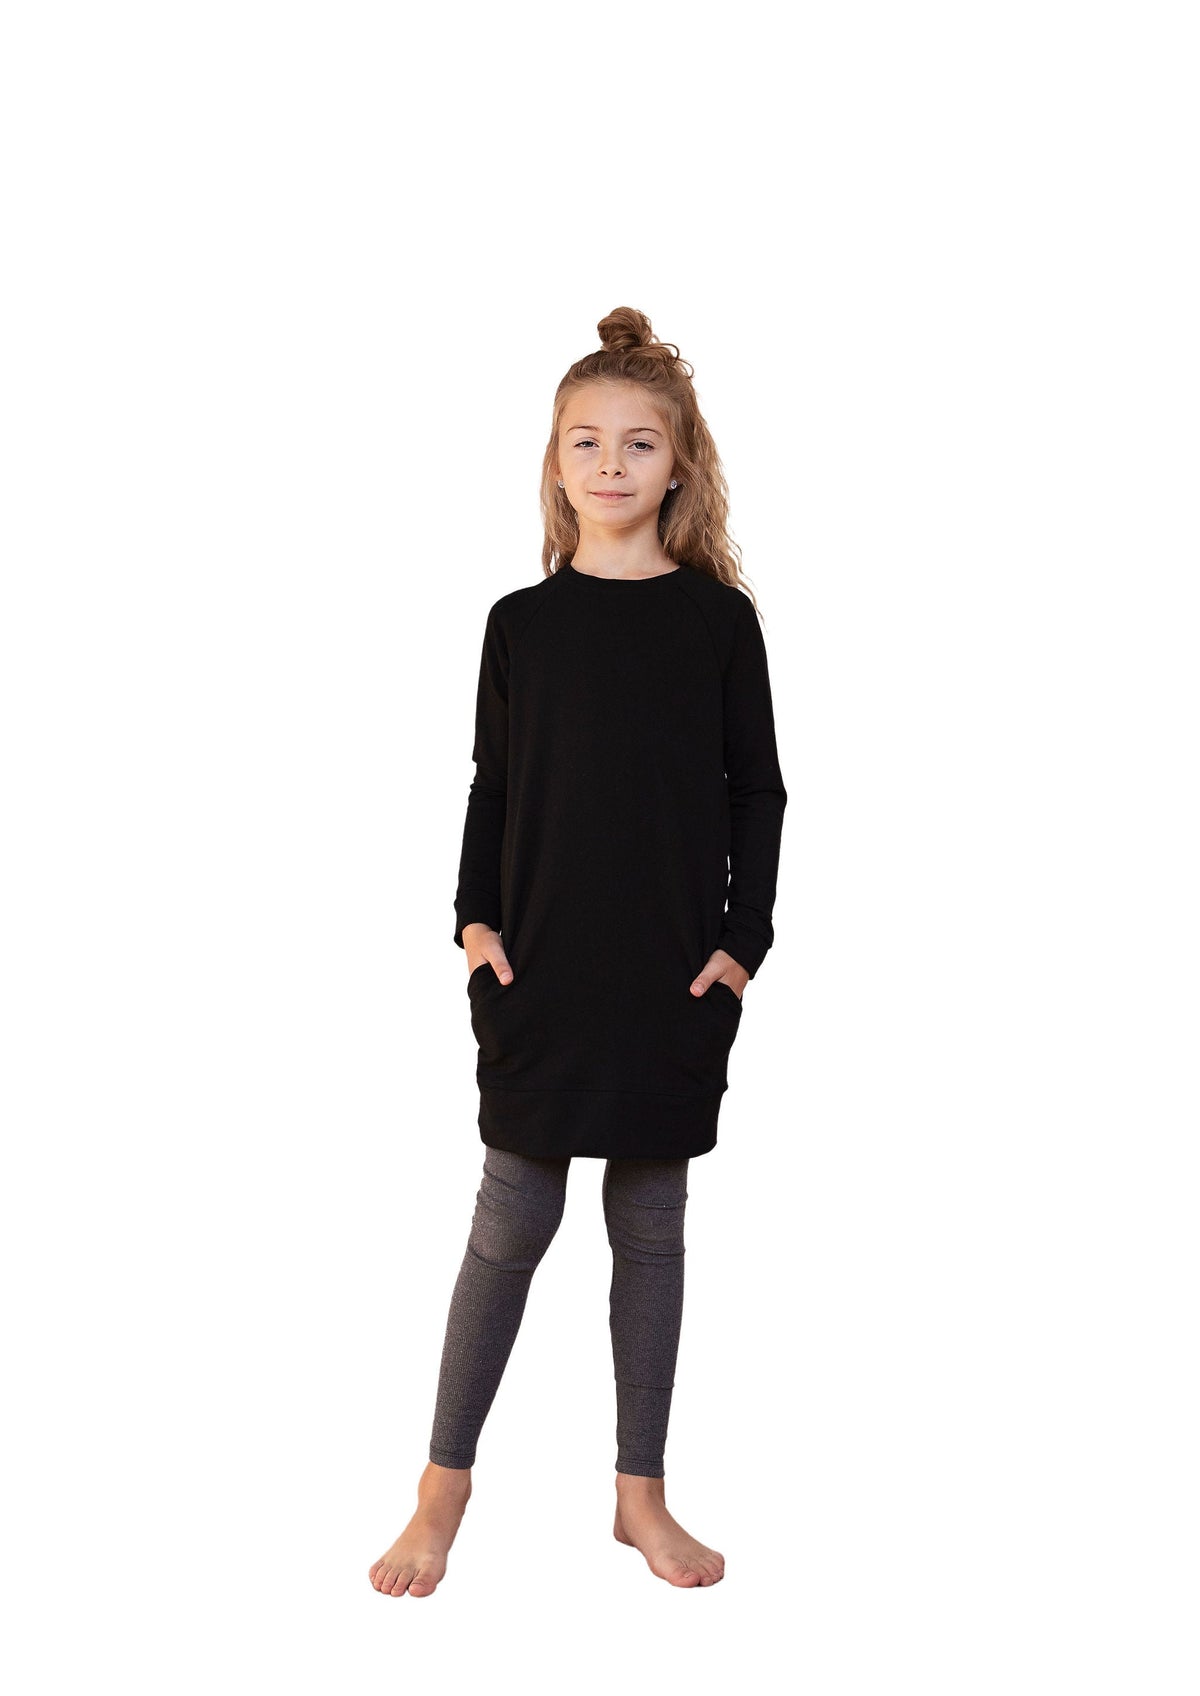 knit dress + sweater + tights + flats - Here's looking at me kid